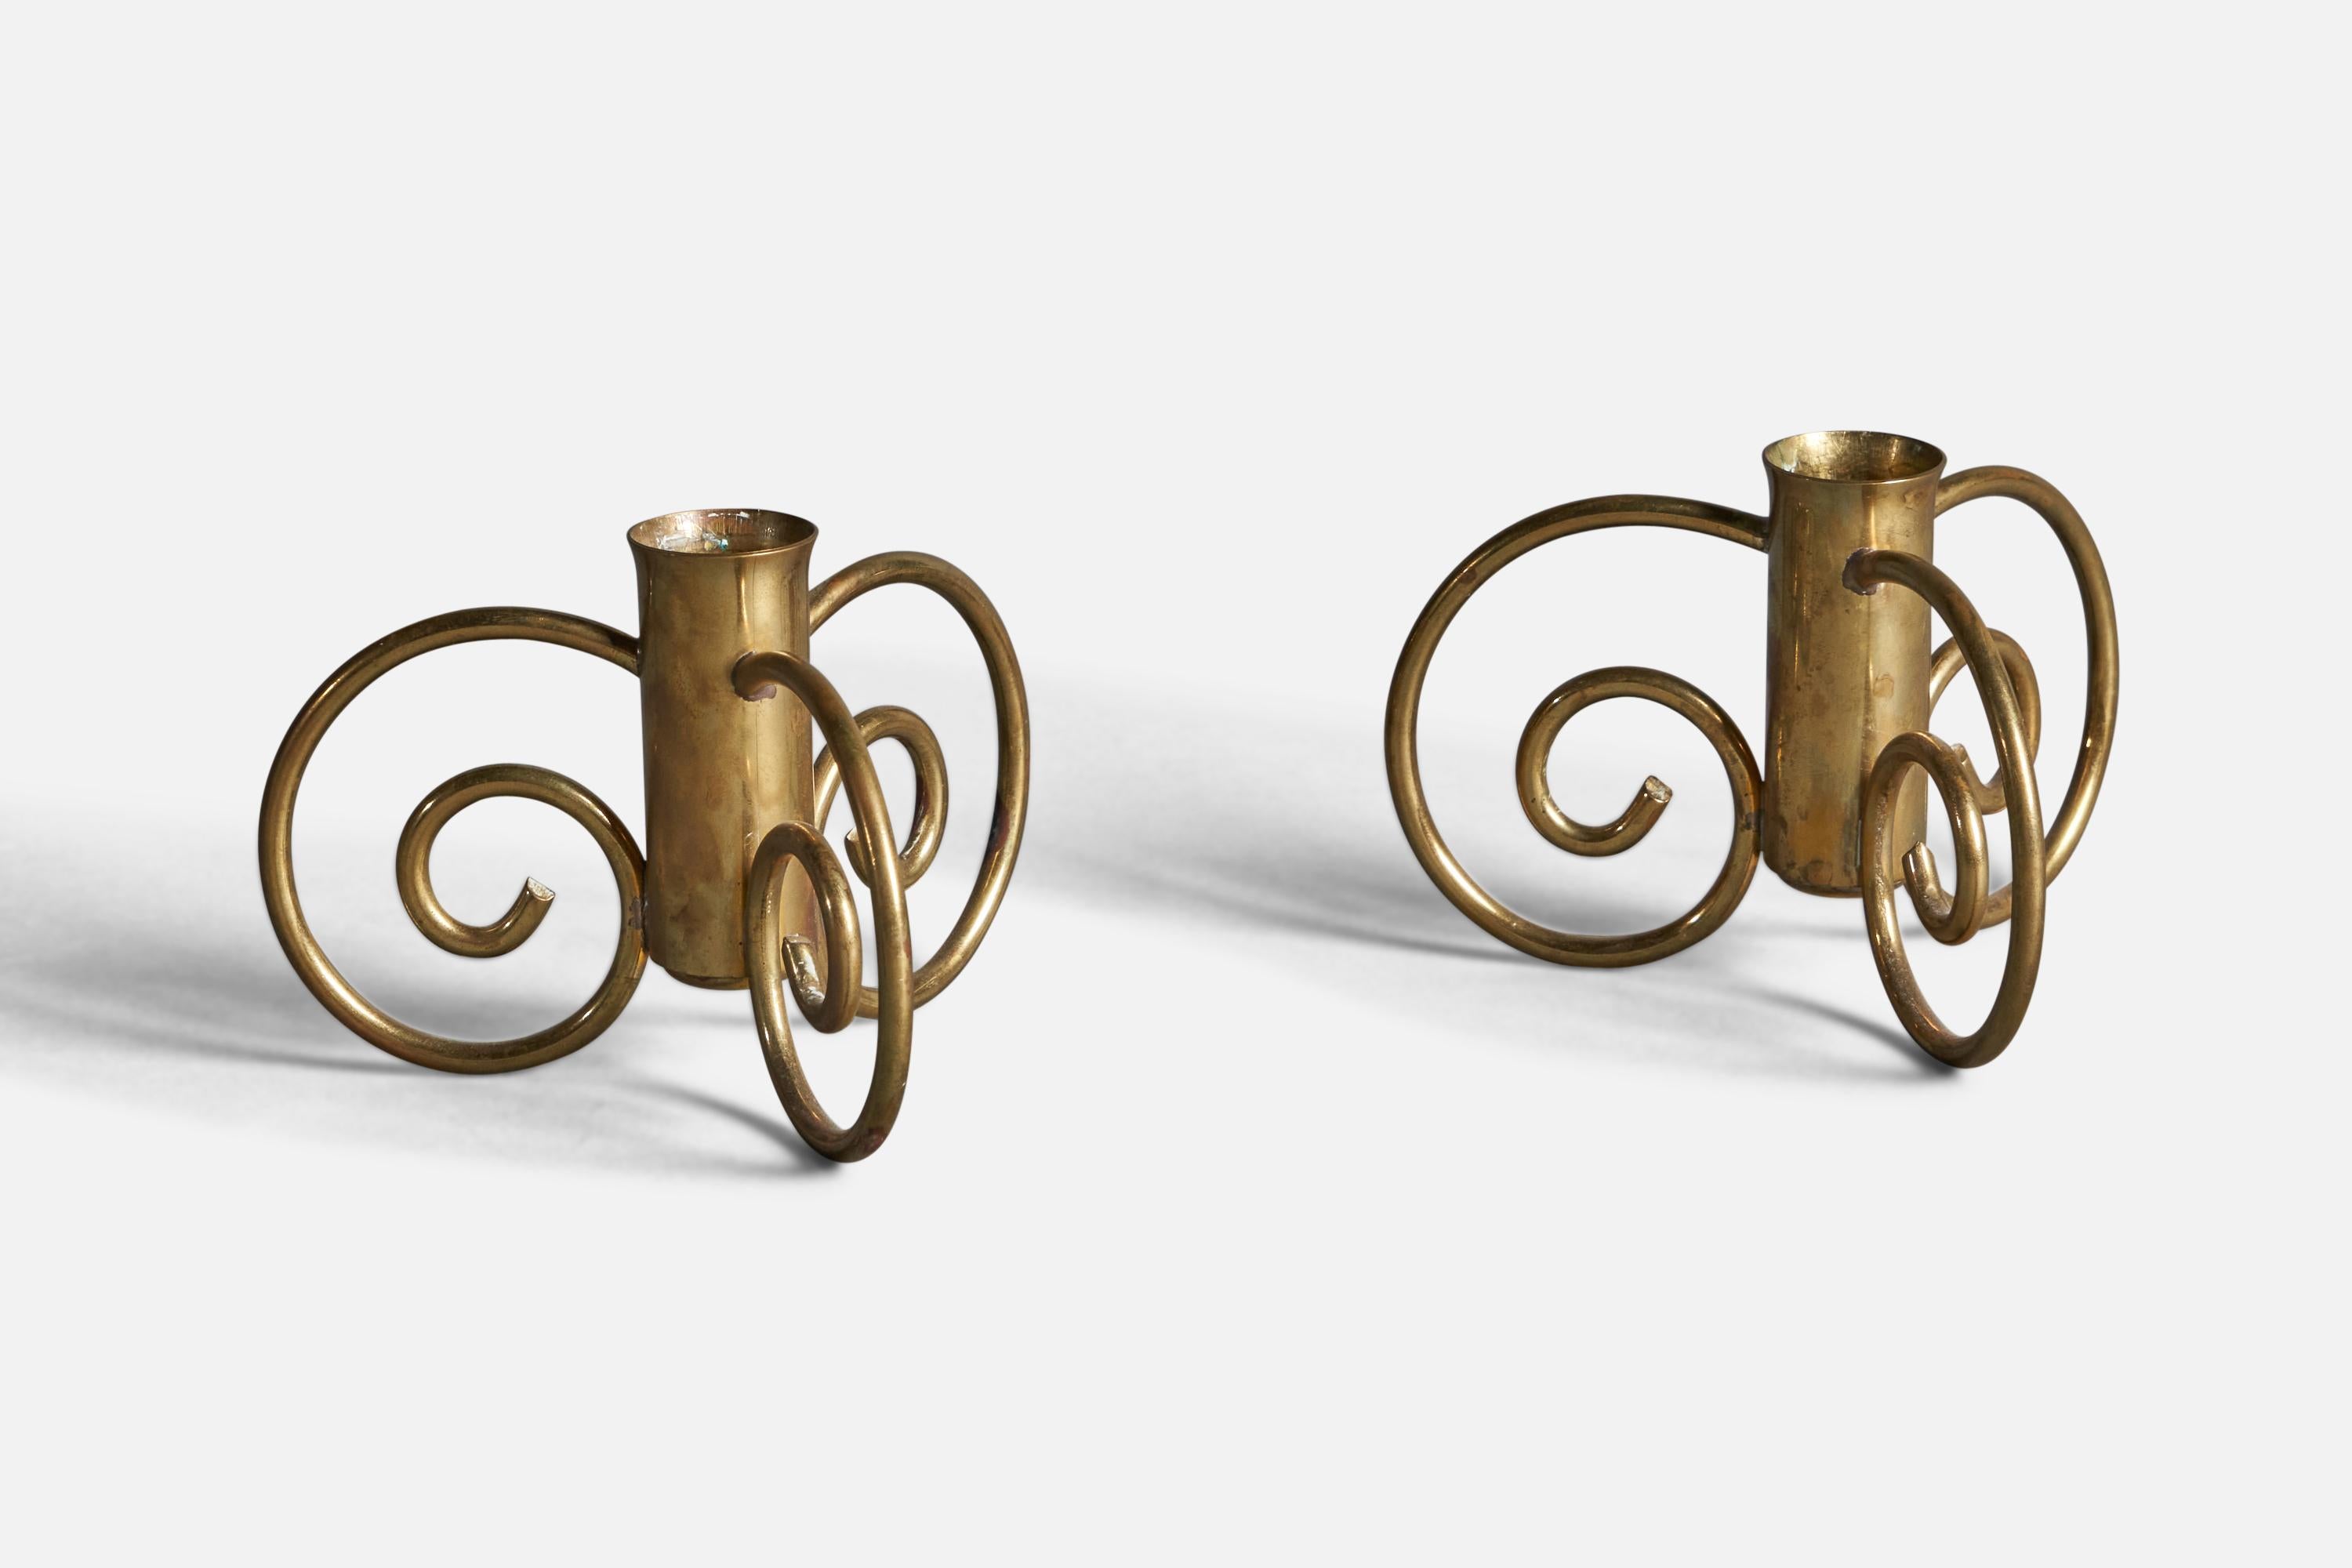 A pair of brass candlesticks designed and produced by Lars Holmström, Arvika, Sweden, c. 1930s.

Candle Diameter (inches): 0.9” 